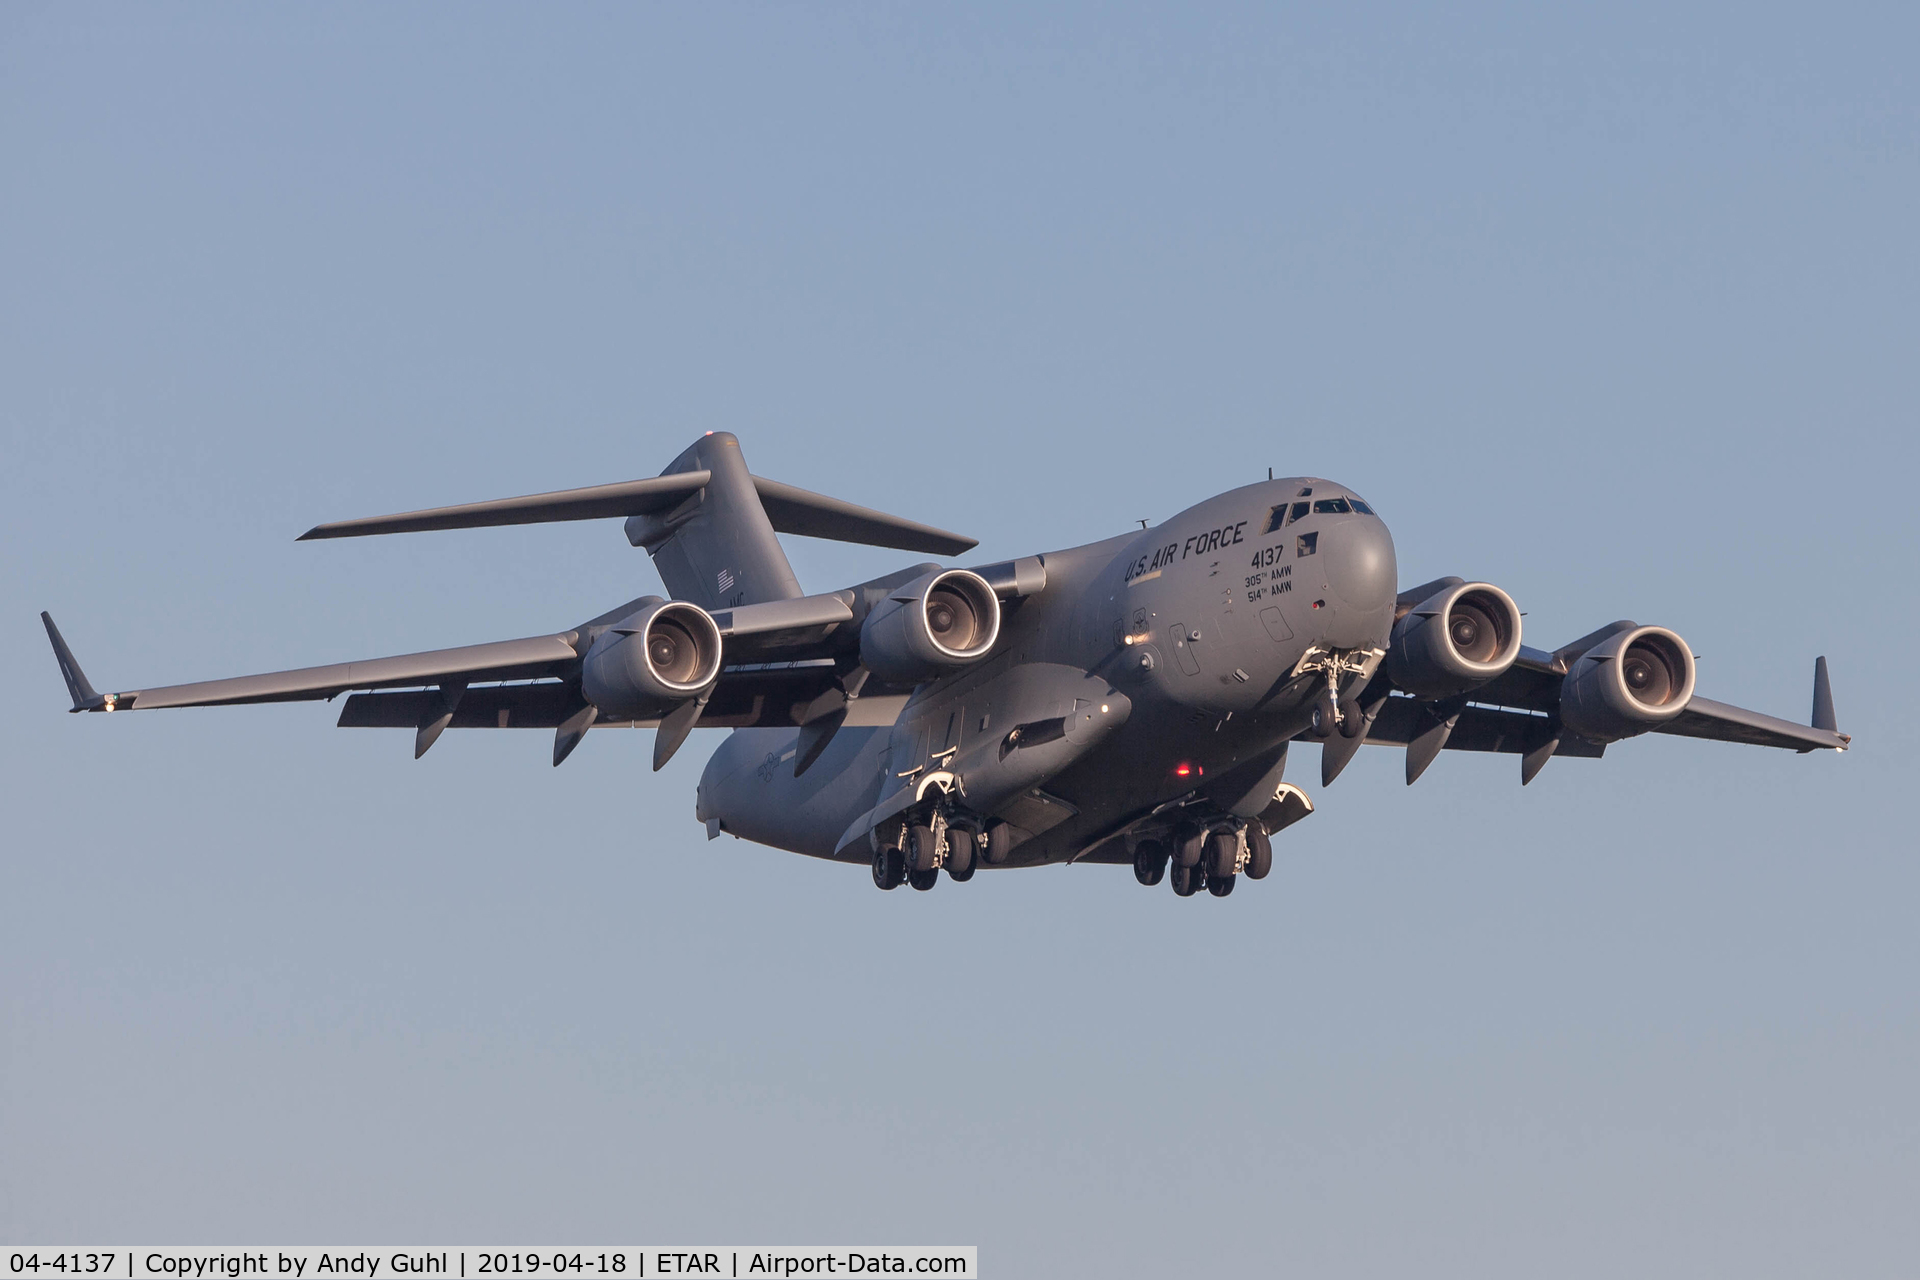 04-4137, 2004 Boeing C-17A Globemaster III C/N P-137, The Spirit of Let's Roll